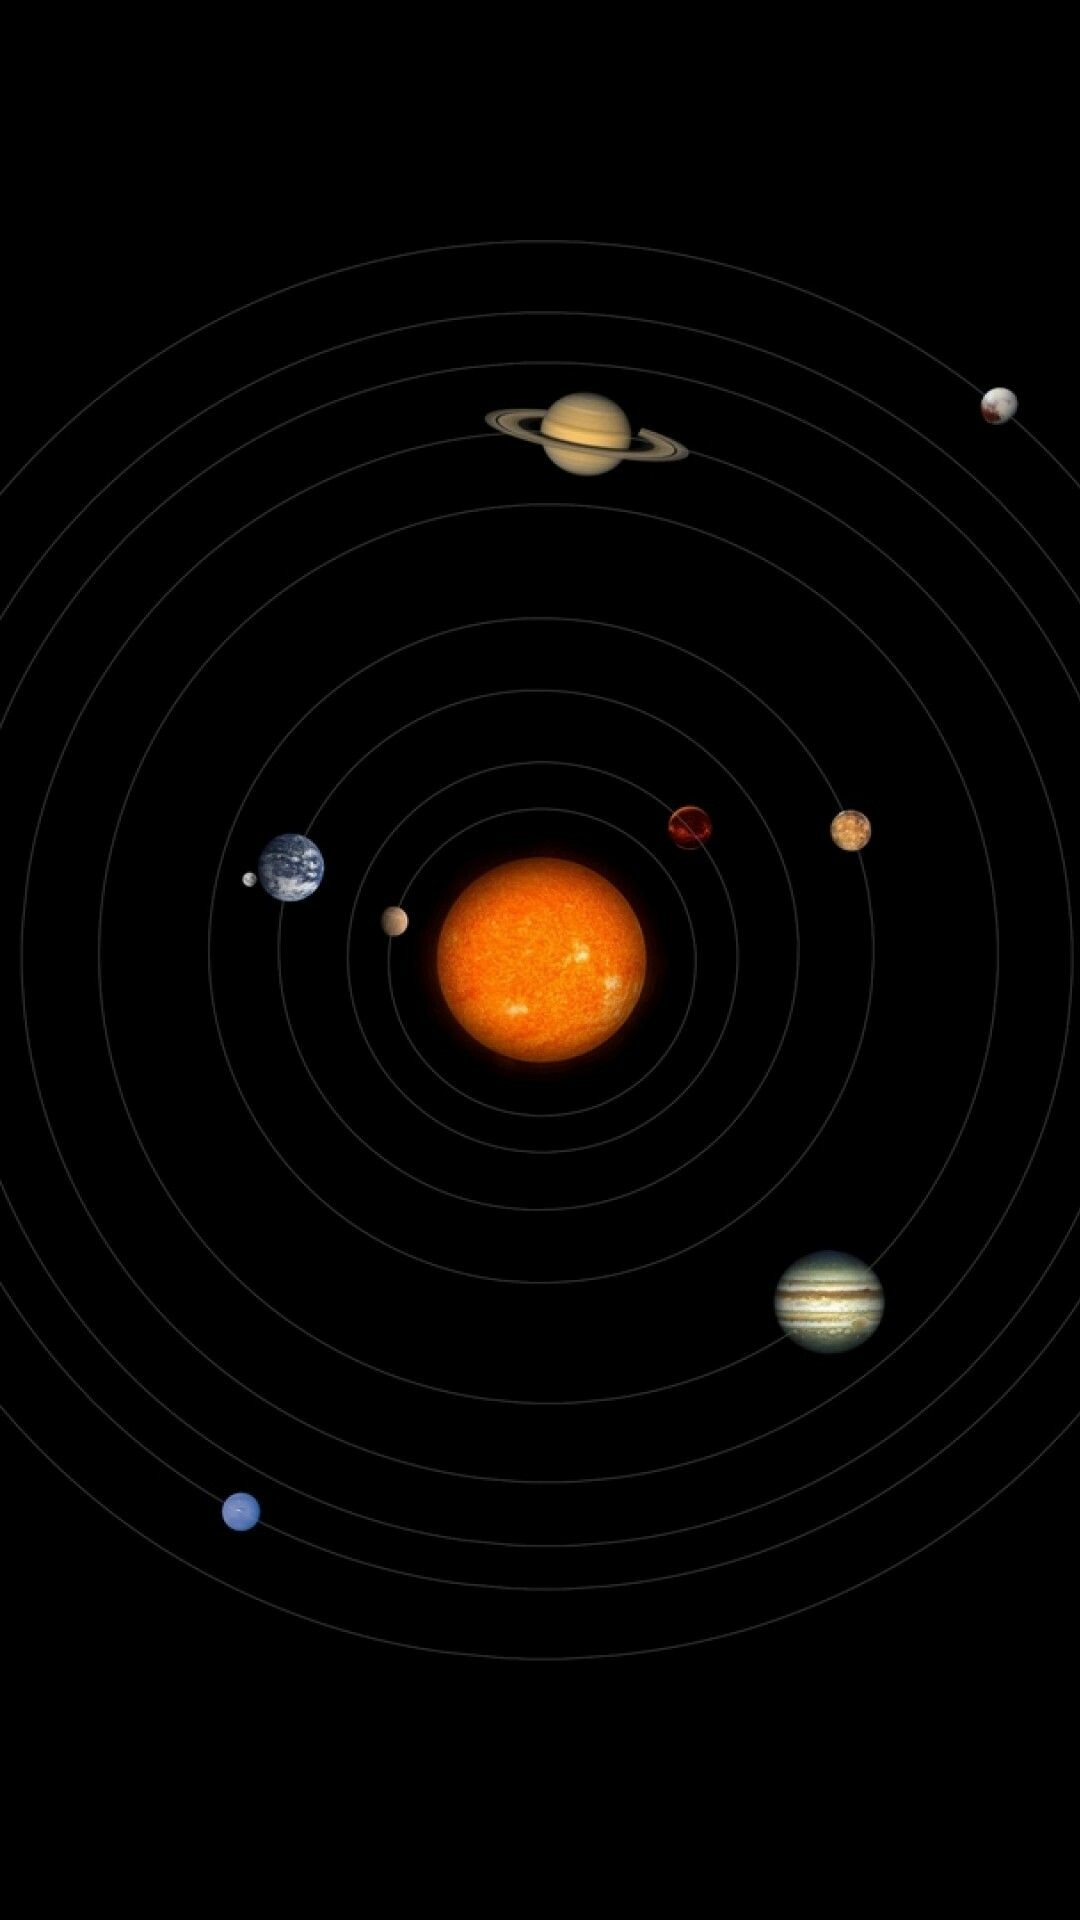 Solar System: It consists of 8 planets, several dwarf planets, dozens of moons, and millions of asteroids, comets, and meteorids. 1080x1920 Full HD Wallpaper.